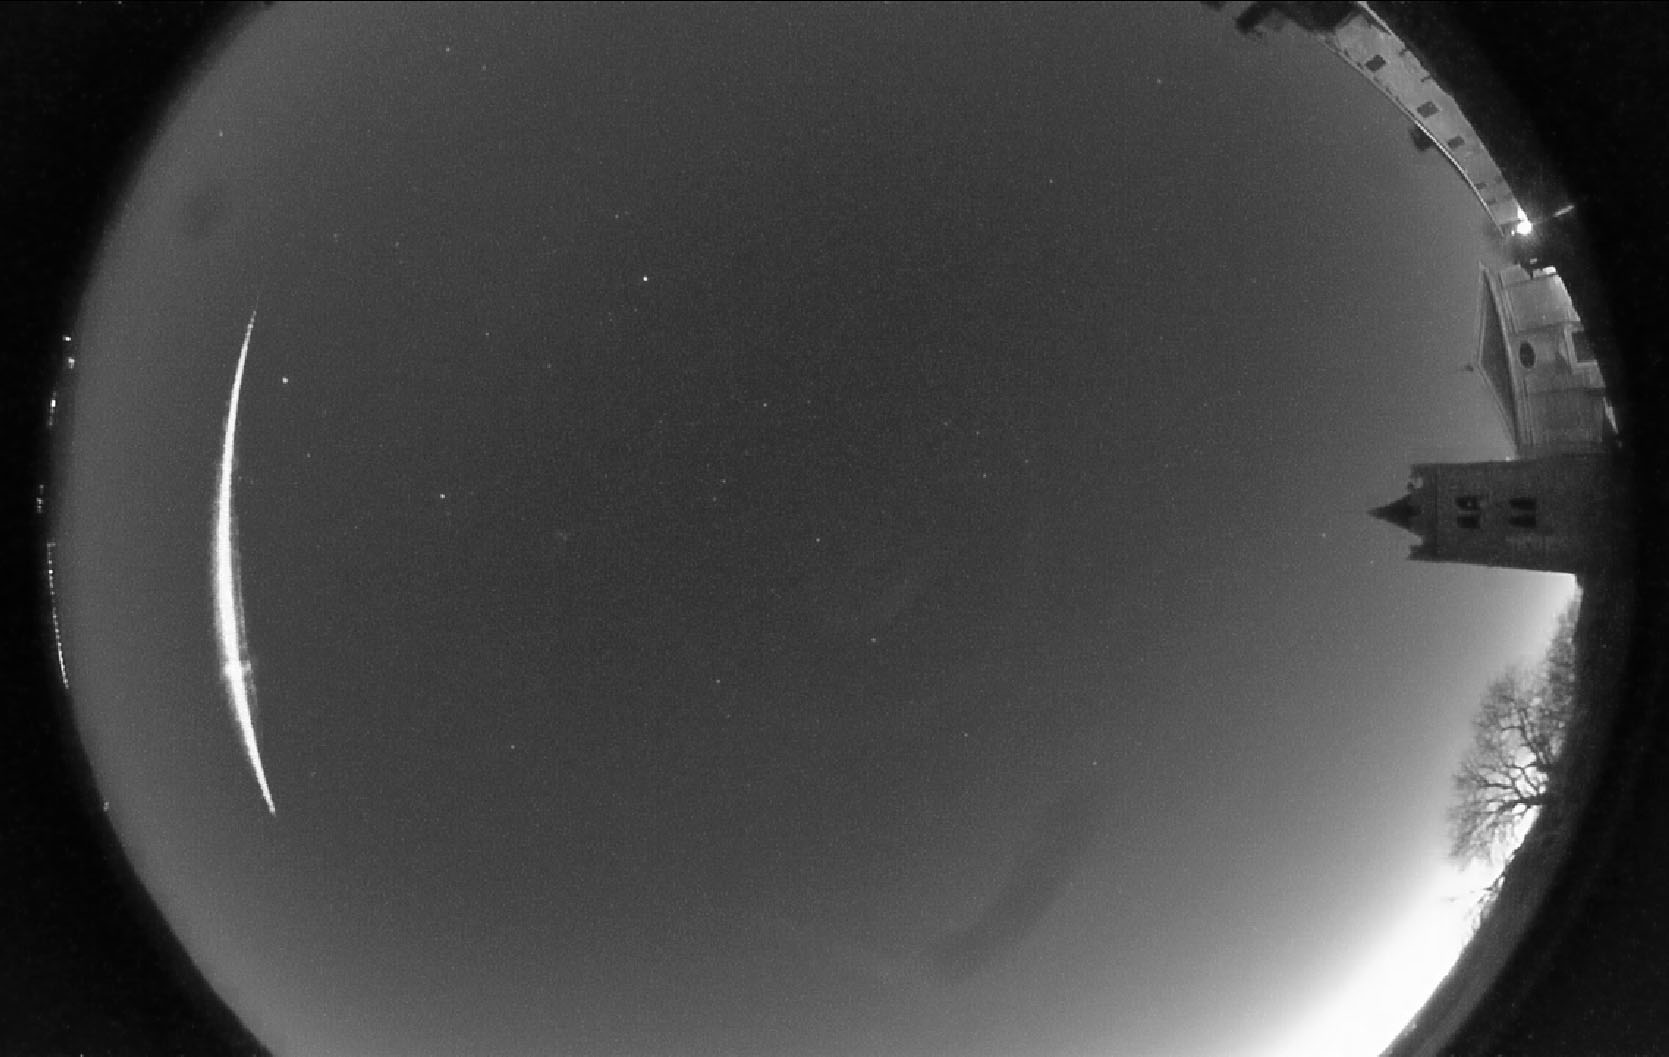 The meteor was spotted northwest of Zadar, Croatia on Jan. 24, 2022. Photo: Croation Astronomical Union